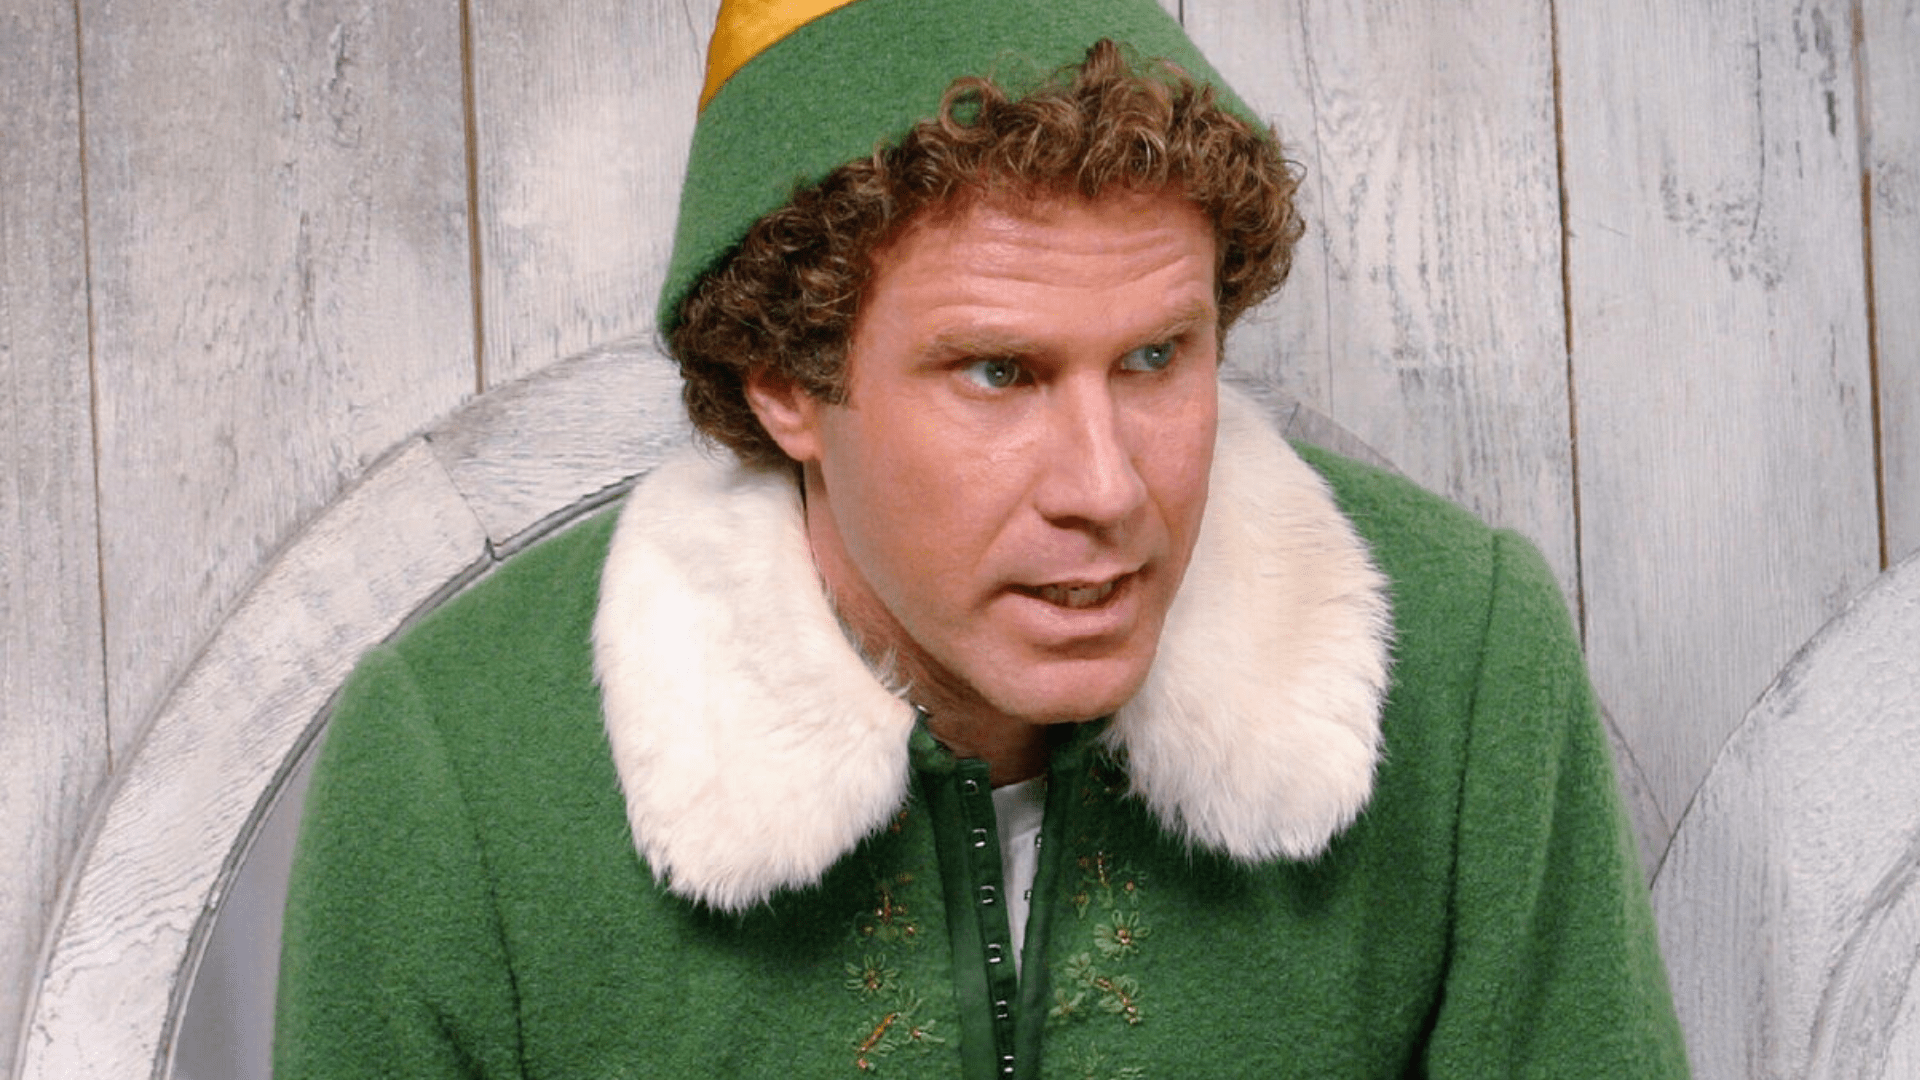 64 Elf (2003) Facts To Get You In The Festive Spirit - Elf Facts